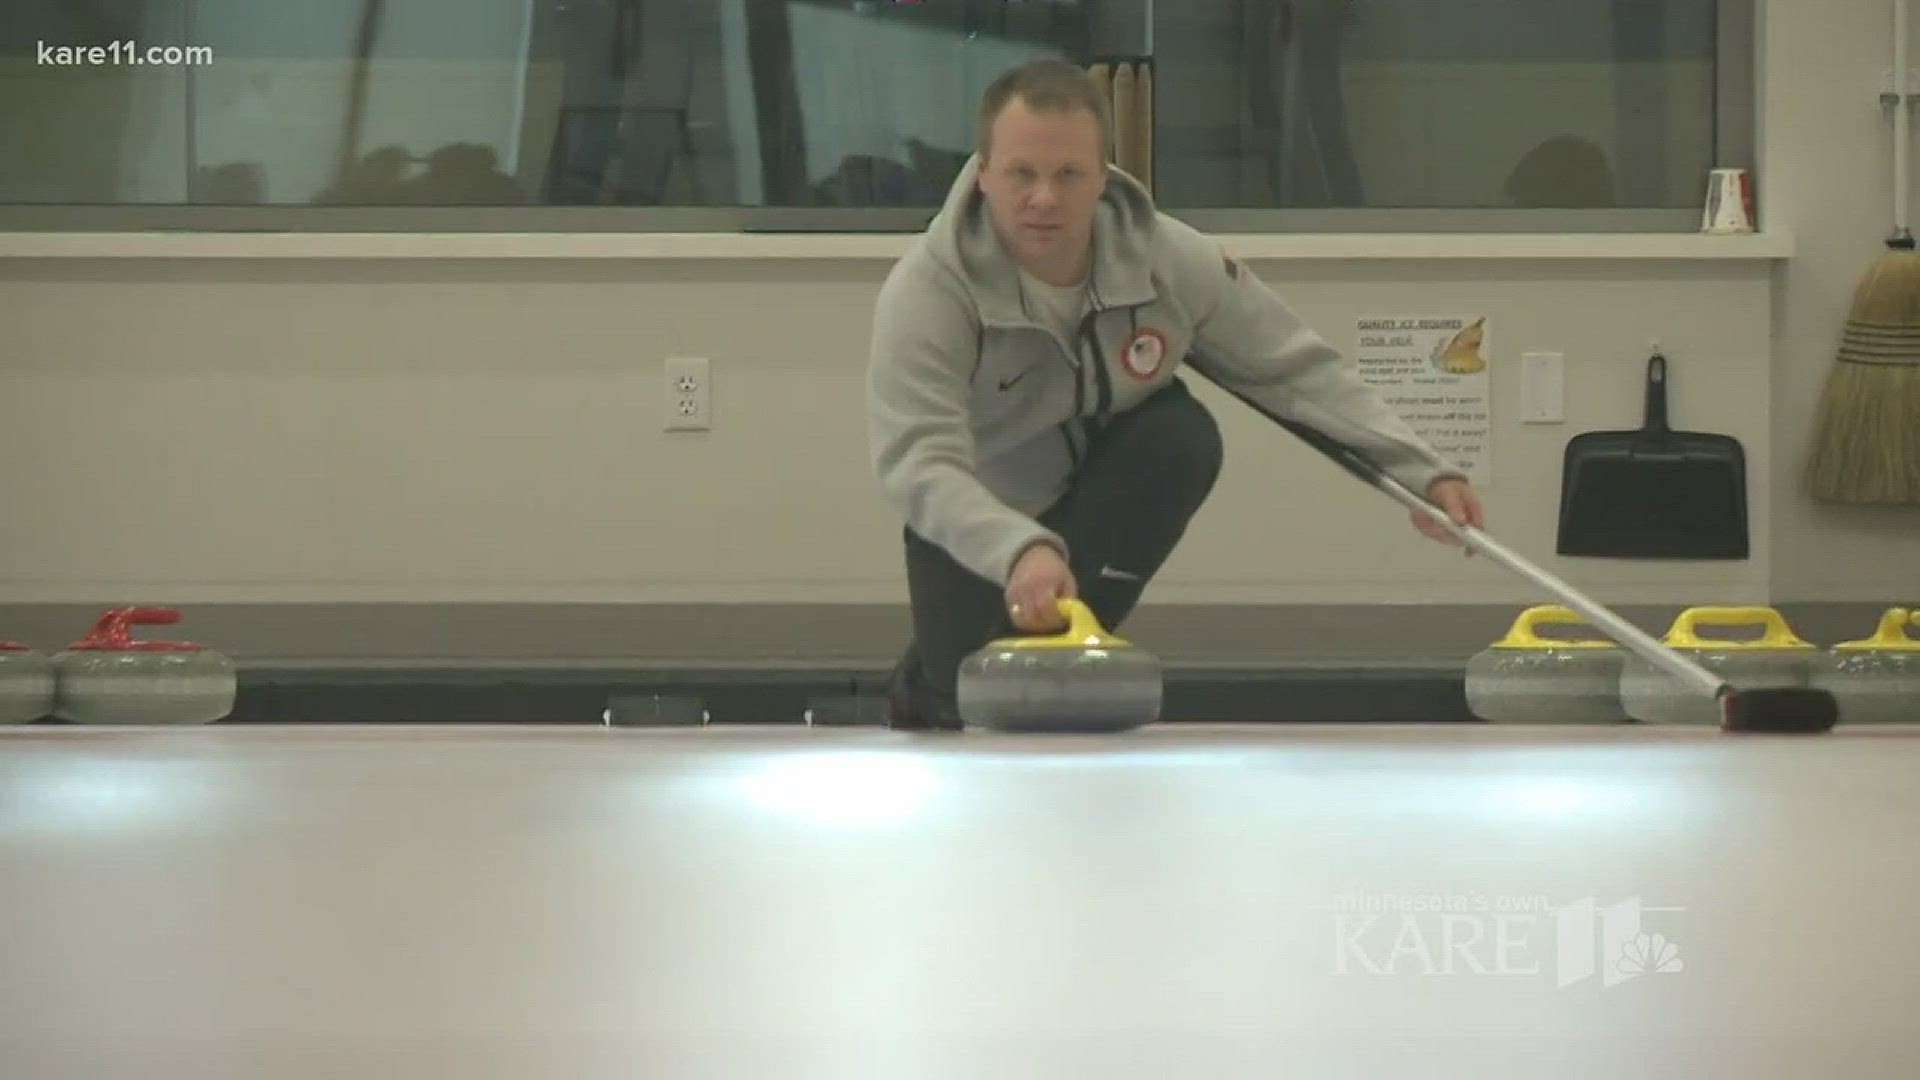 Getting into Olympic spirit at Chaska Curling Center